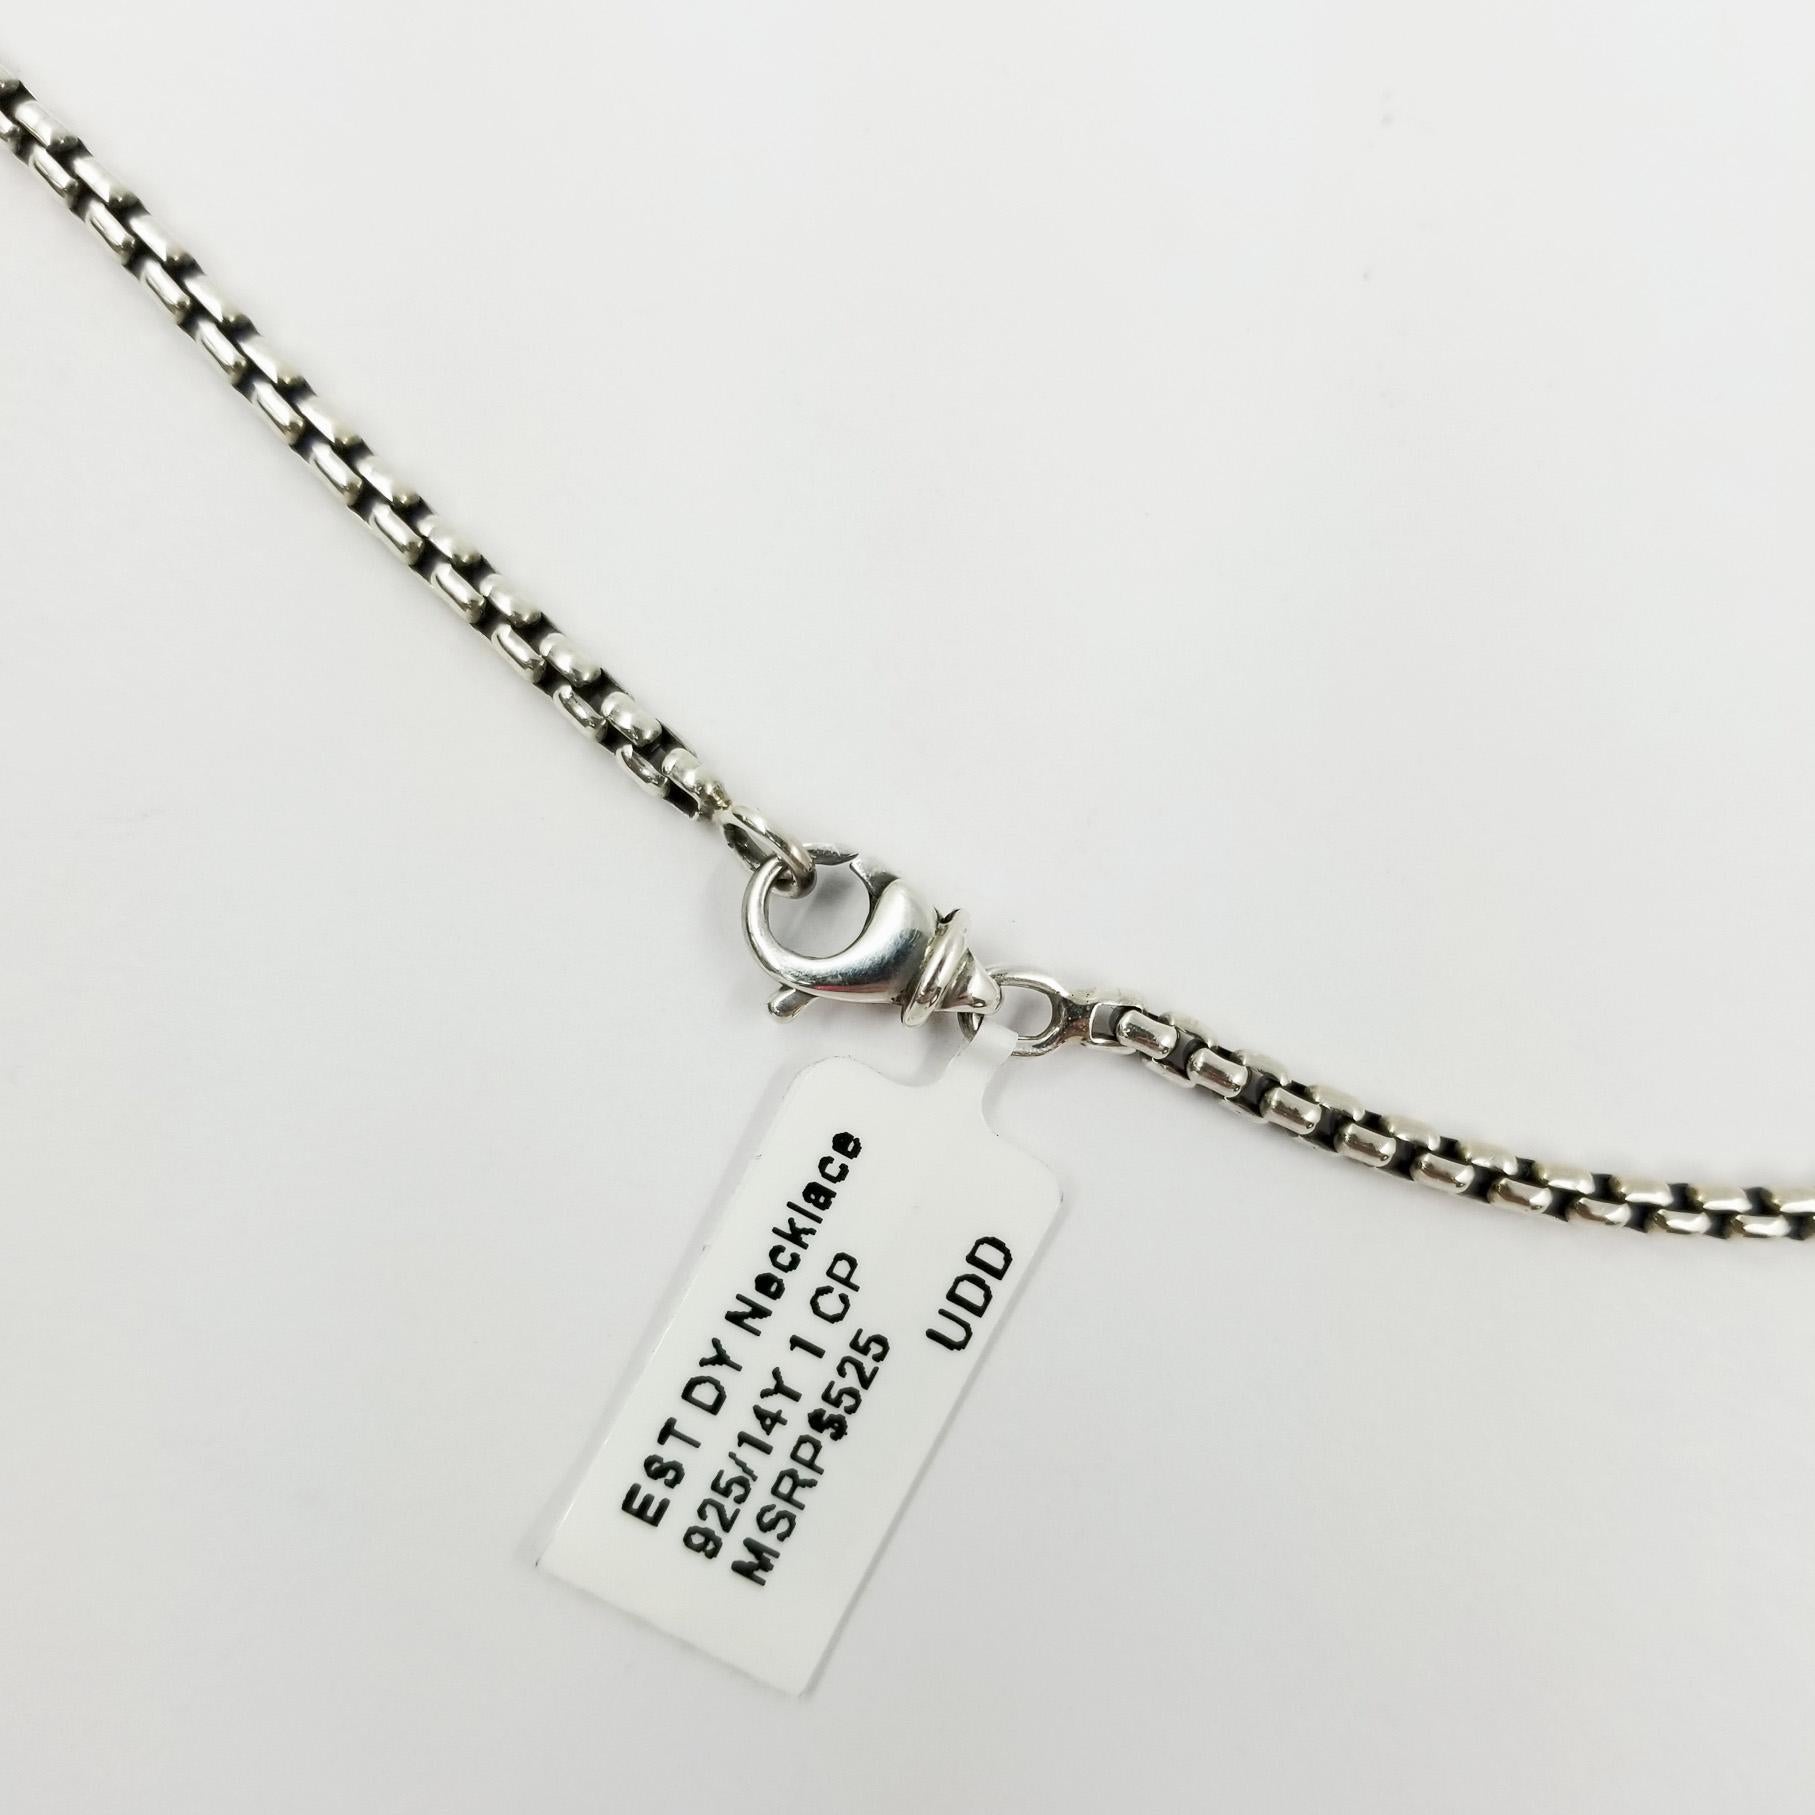 16.5 inch necklace